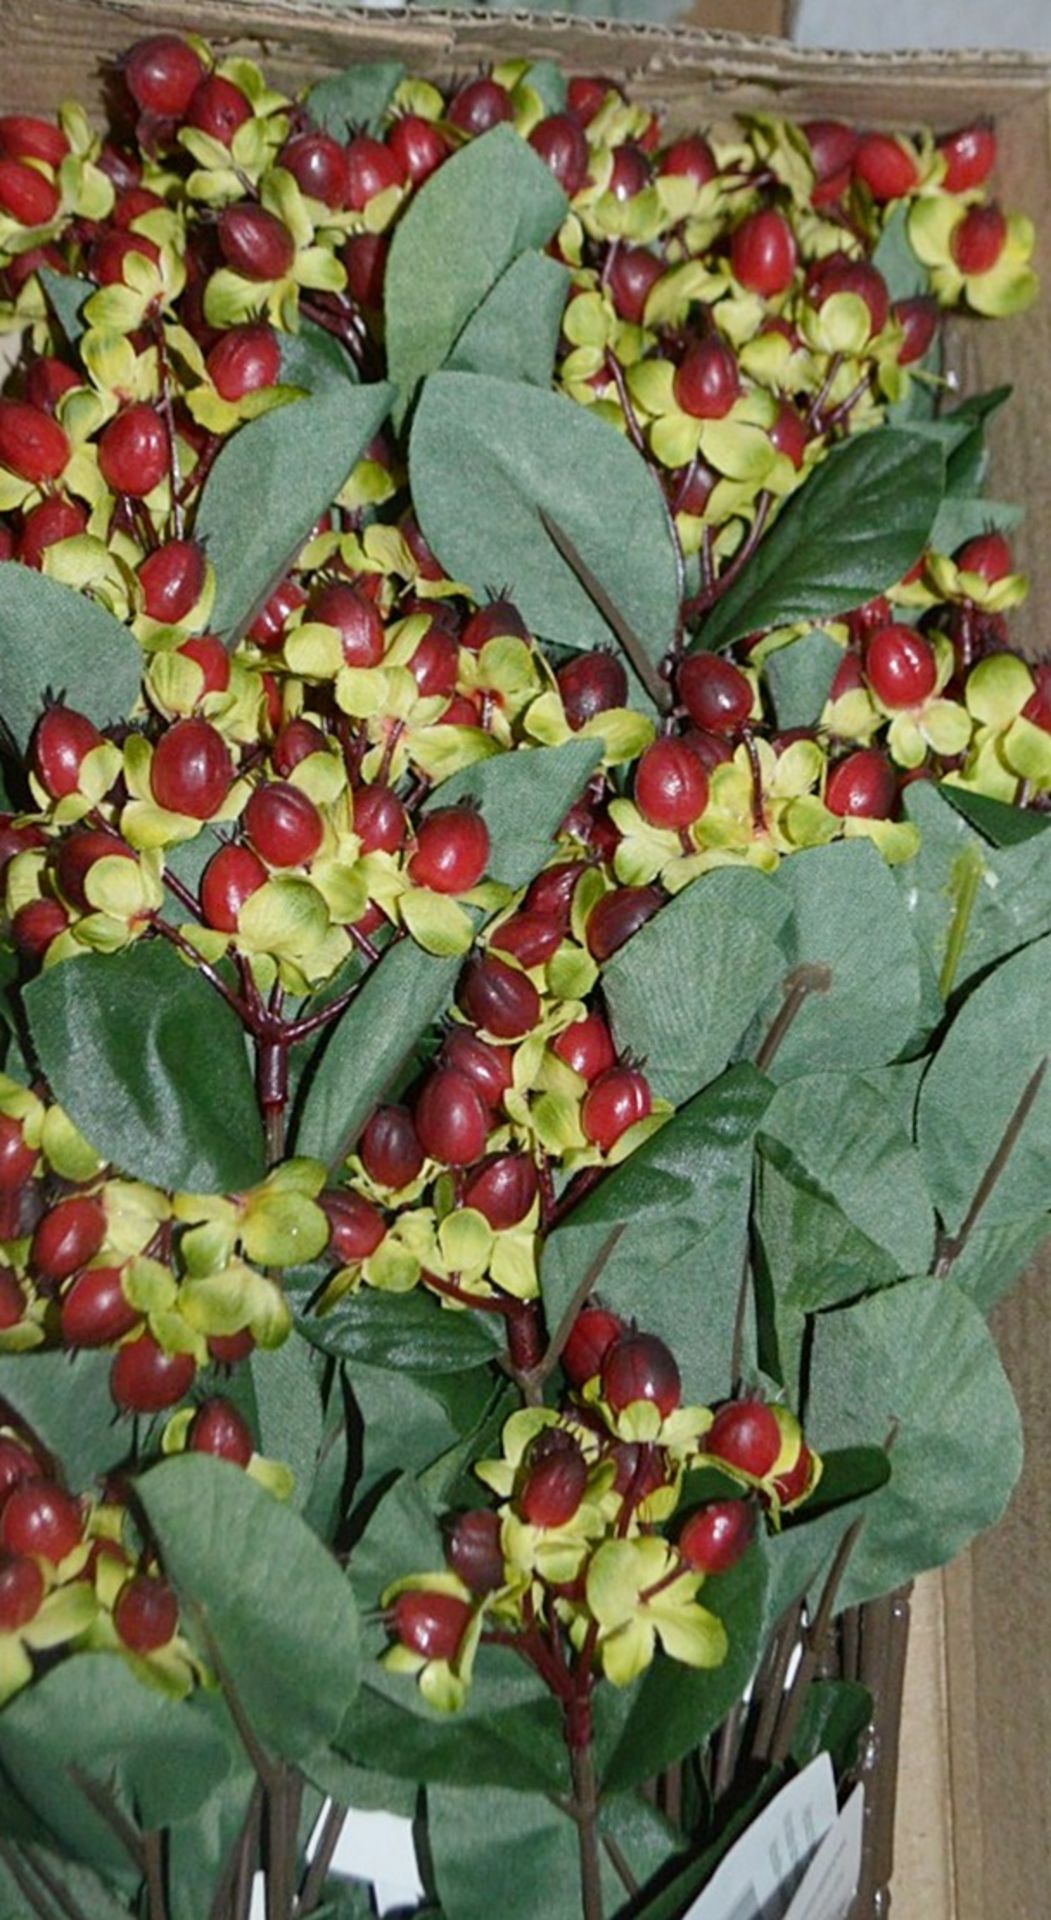 85 x Luxury Artificial Plant Floristry Sprays - Mostly Red Hypericum - 70cm Tall - Total RRP £400.00 - Image 5 of 6